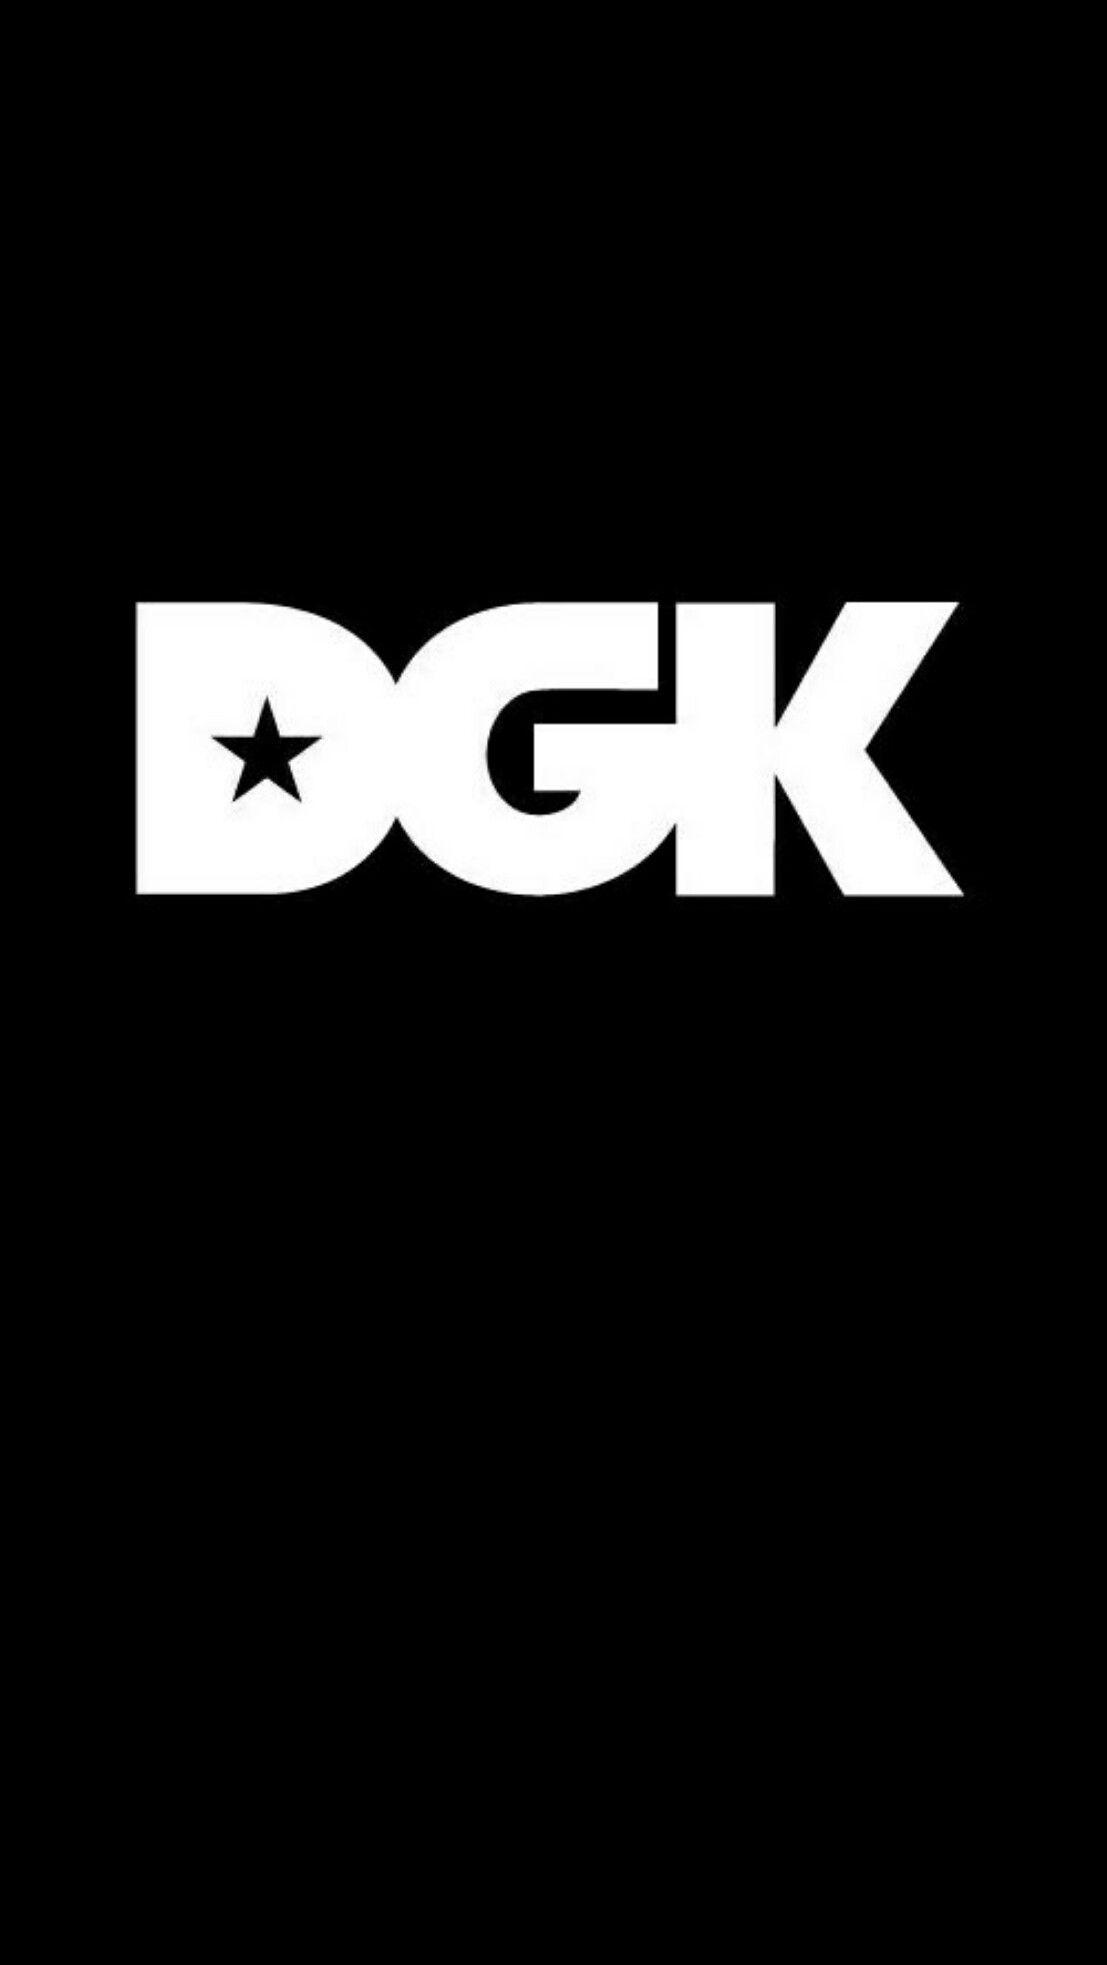 dgk #black #wallpaper #iPhone #android